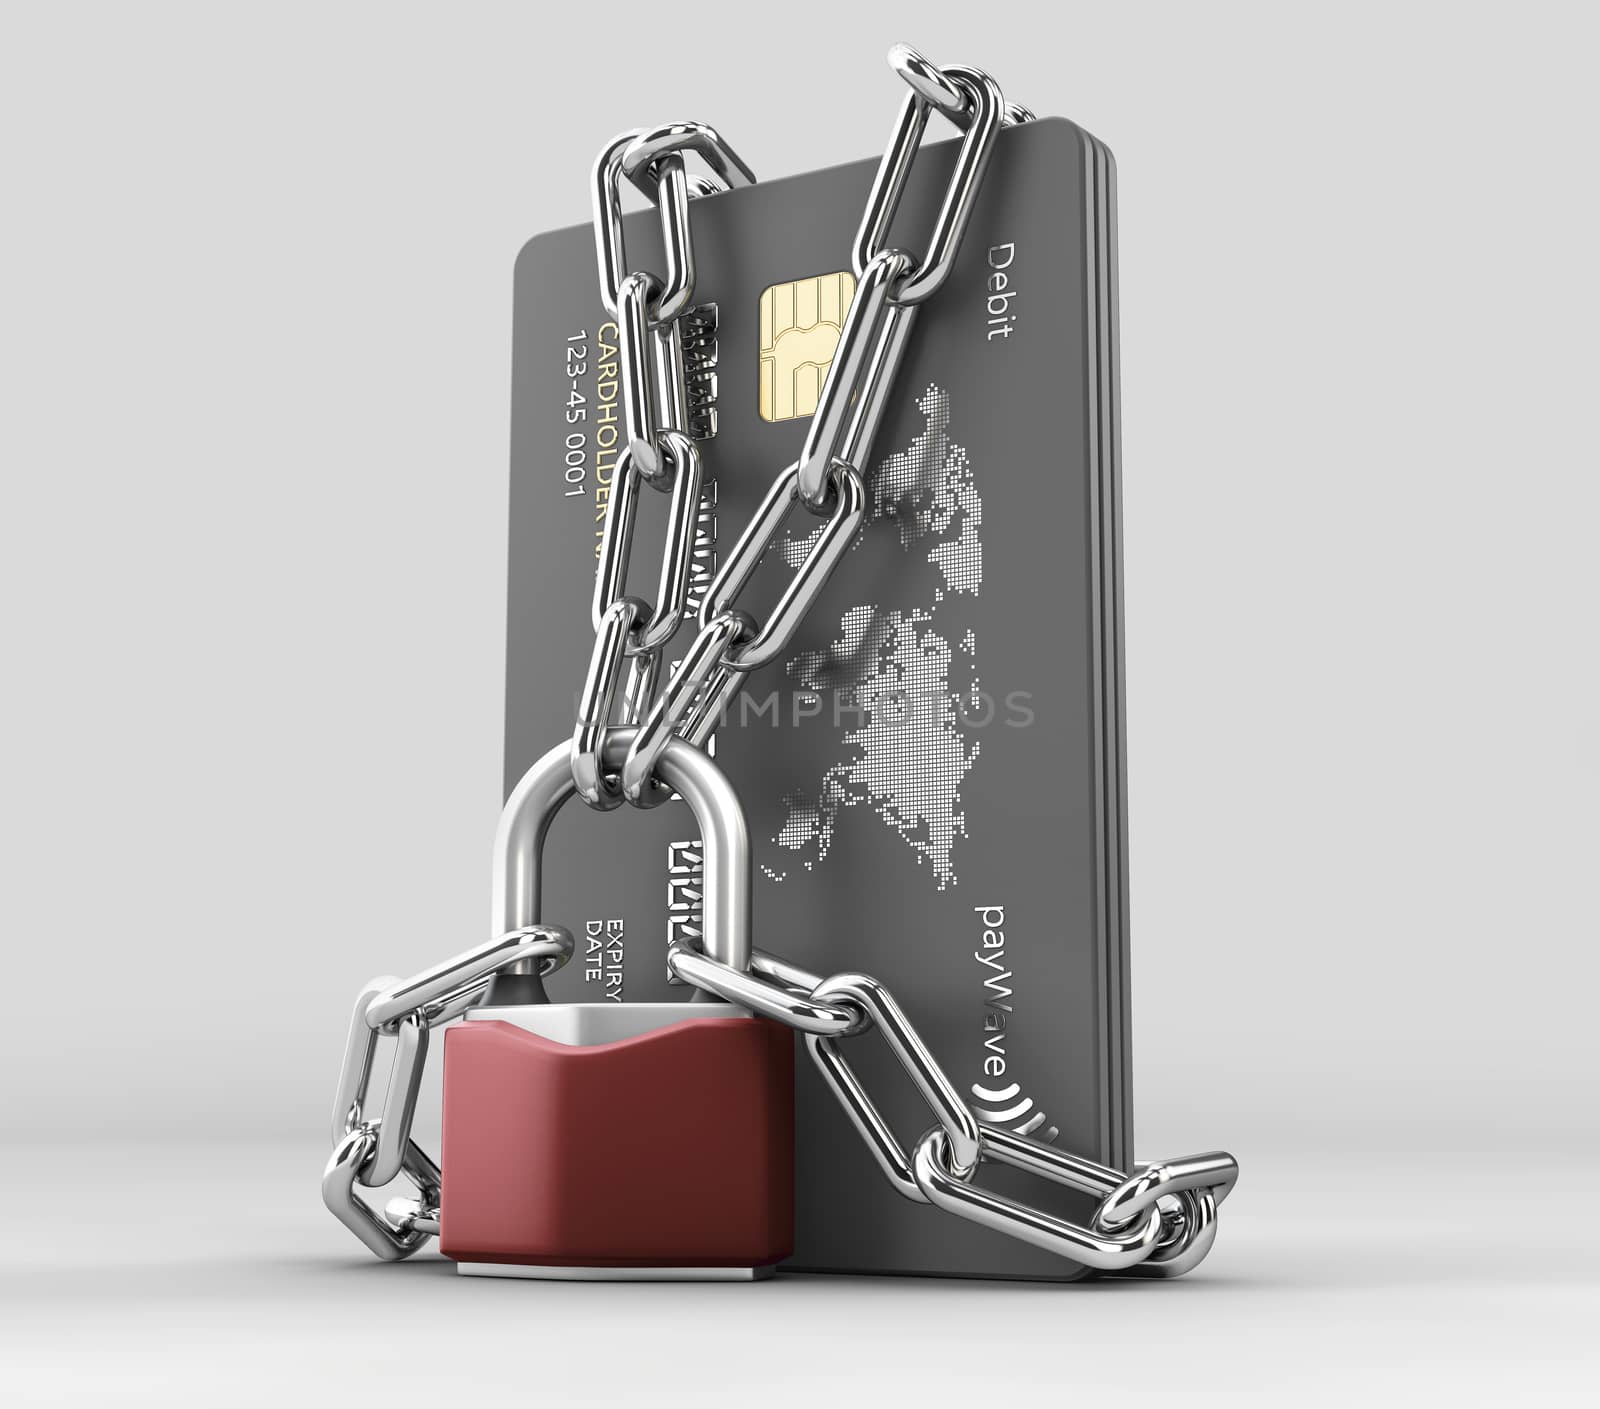 3d rendering of credit card with chains and pad lock, cplipping path included.